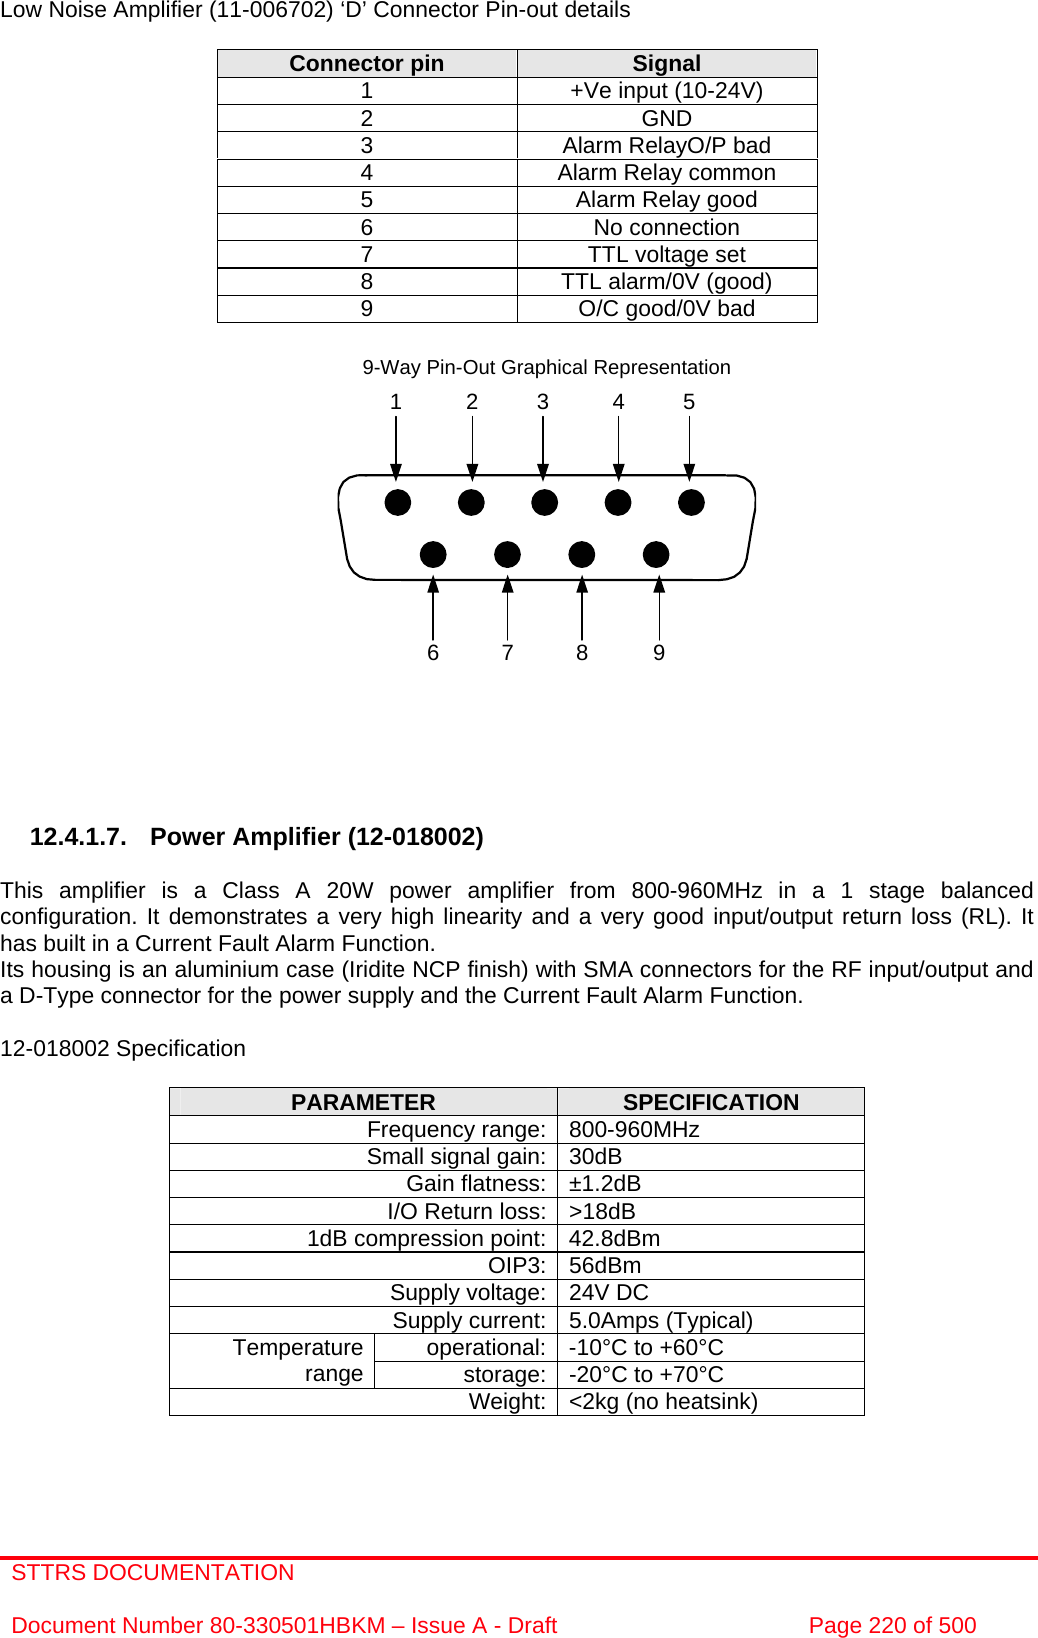 STTRS DOCUMENTATION  Document Number 80-330501HBKM – Issue A - Draft  Page 220 of 500  7 8 961 2 3 4 59-Way Pin-Out Graphical Representation Low Noise Amplifier (11-006702) ‘D’ Connector Pin-out details  Connector pin  Signal 1  +Ve input (10-24V) 2 GND 3  Alarm RelayO/P bad 4  Alarm Relay common 5  Alarm Relay good 6 No connection 7  TTL voltage set 8  TTL alarm/0V (good) 9  O/C good/0V bad                    12.4.1.7.  Power Amplifier (12-018002)  This amplifier is a Class A 20W power amplifier from 800-960MHz in a 1 stage balanced configuration. It demonstrates a very high linearity and a very good input/output return loss (RL). It has built in a Current Fault Alarm Function. Its housing is an aluminium case (Iridite NCP finish) with SMA connectors for the RF input/output and a D-Type connector for the power supply and the Current Fault Alarm Function.  12-018002 Specification  PARAMETER  SPECIFICATION Frequency range: 800-960MHz Small signal gain: 30dB Gain flatness: ±1.2dB I/O Return loss: &gt;18dB 1dB compression point: 42.8dBm OIP3: 56dBm Supply voltage: 24V DC Supply current: 5.0Amps (Typical) operational: -10°C to +60°C Temperature range  storage: -20°C to +70°C Weight: &lt;2kg (no heatsink)  